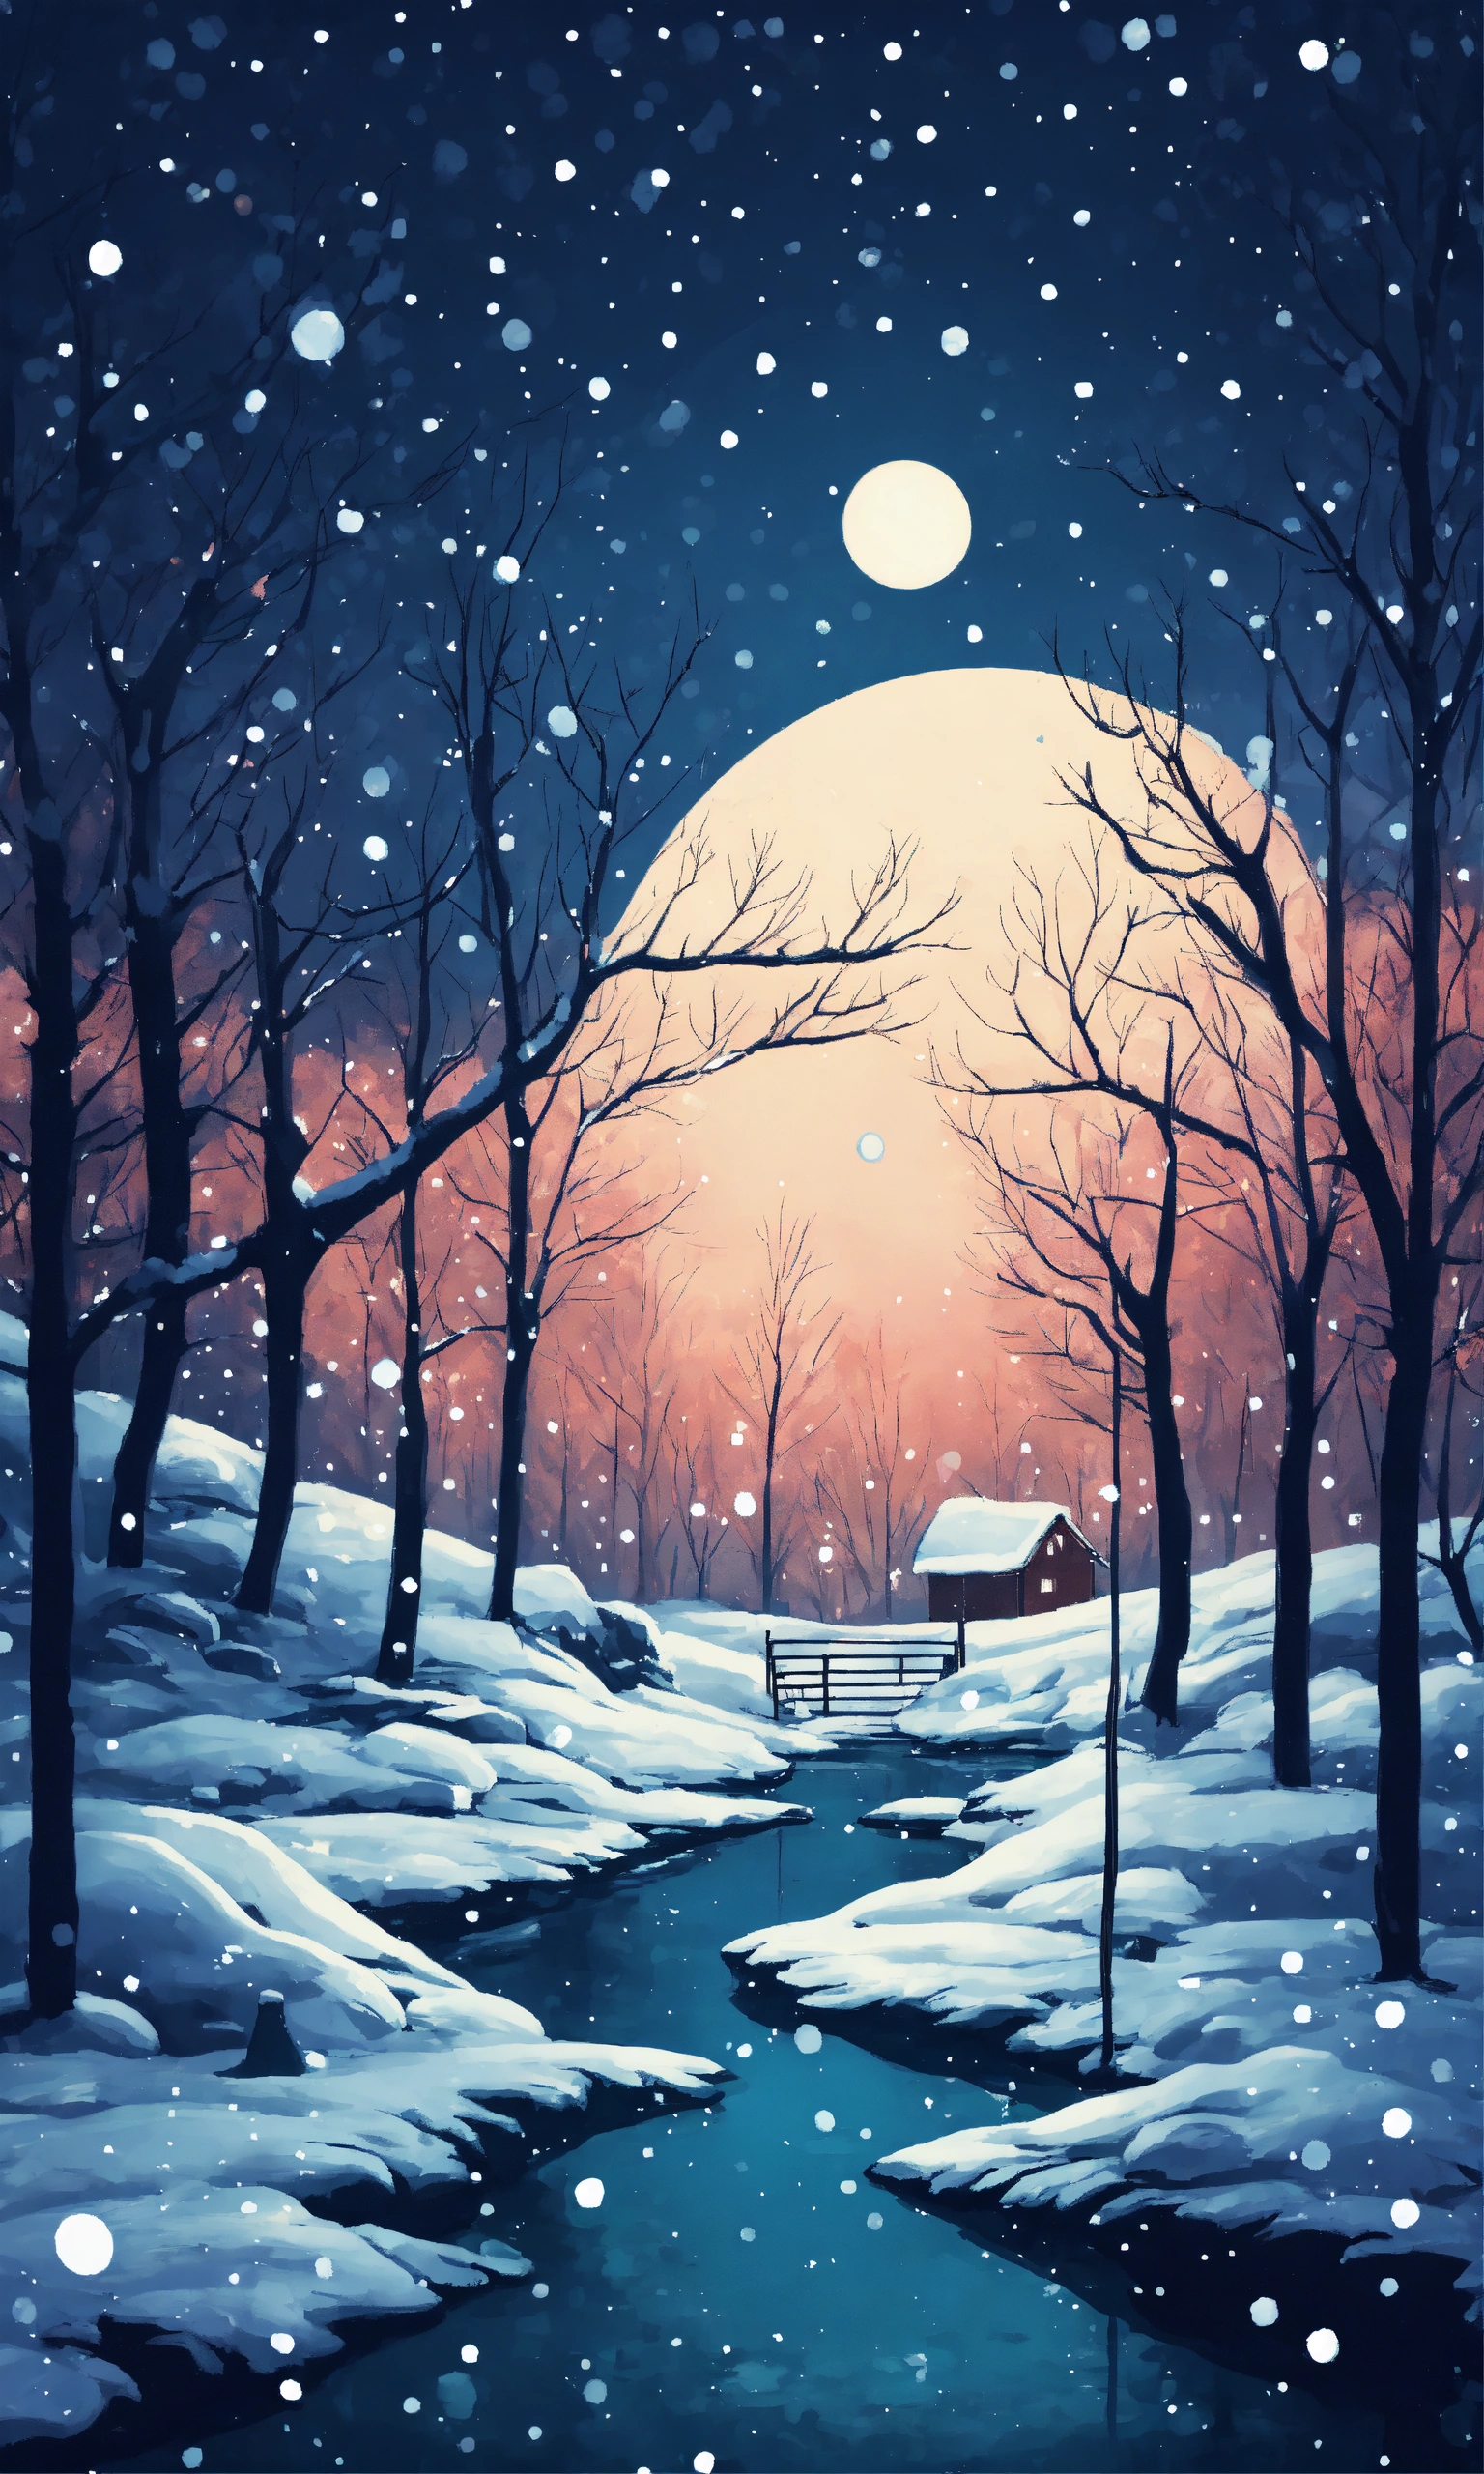 Lexica - Tee shirt design Snowy midnight scene in winter. surreal style